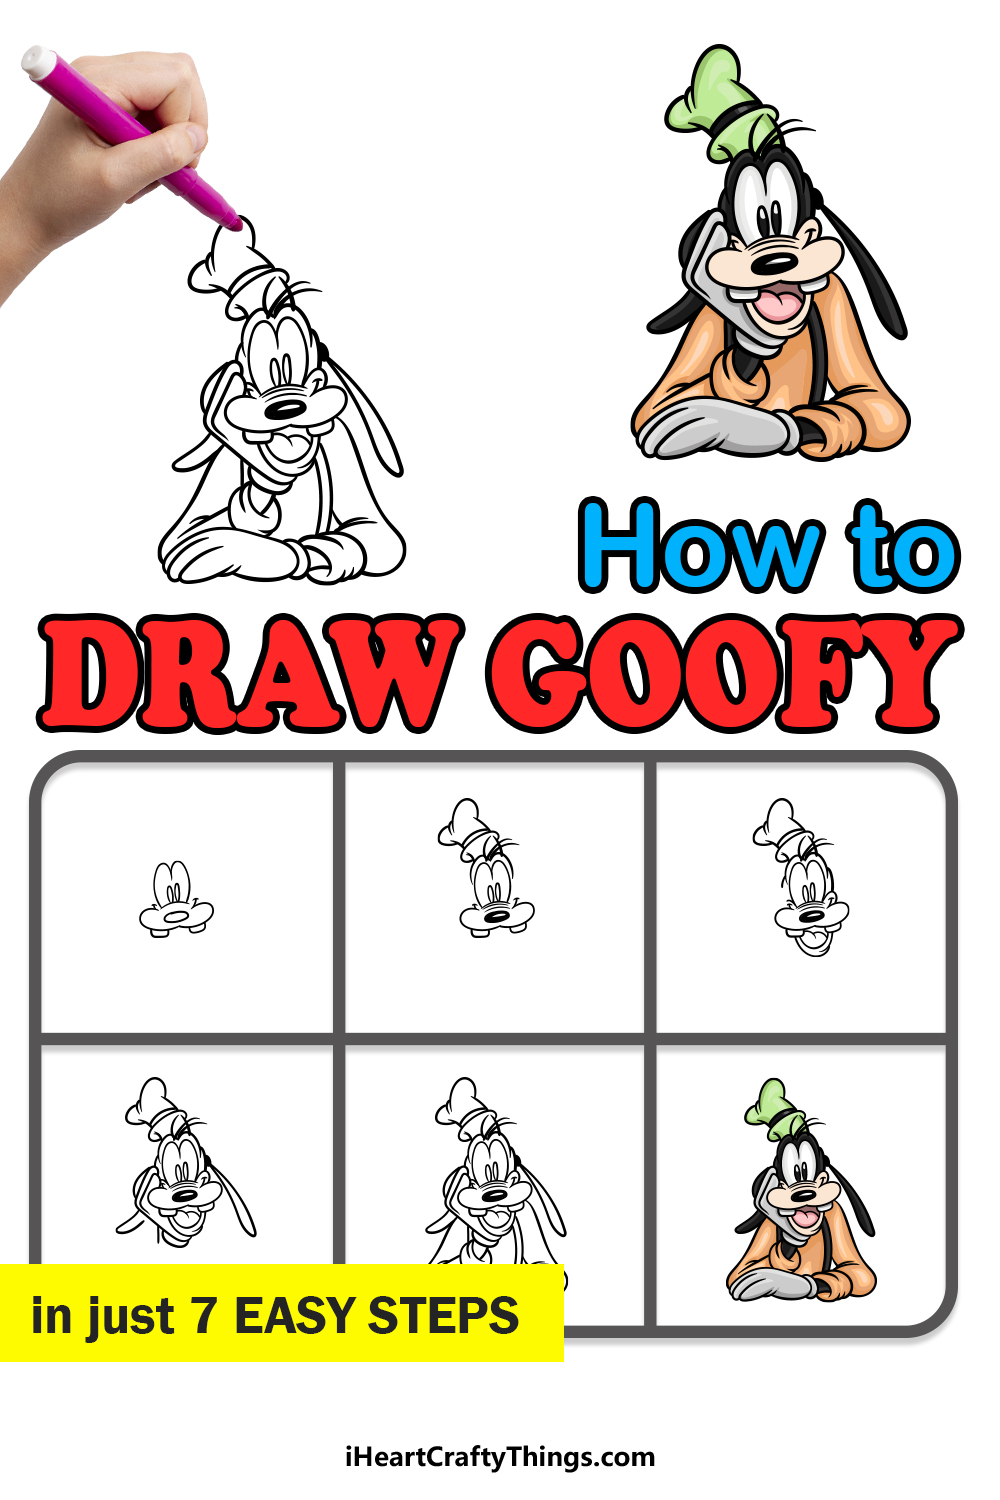 how to draw Goofy in 7 easy steps